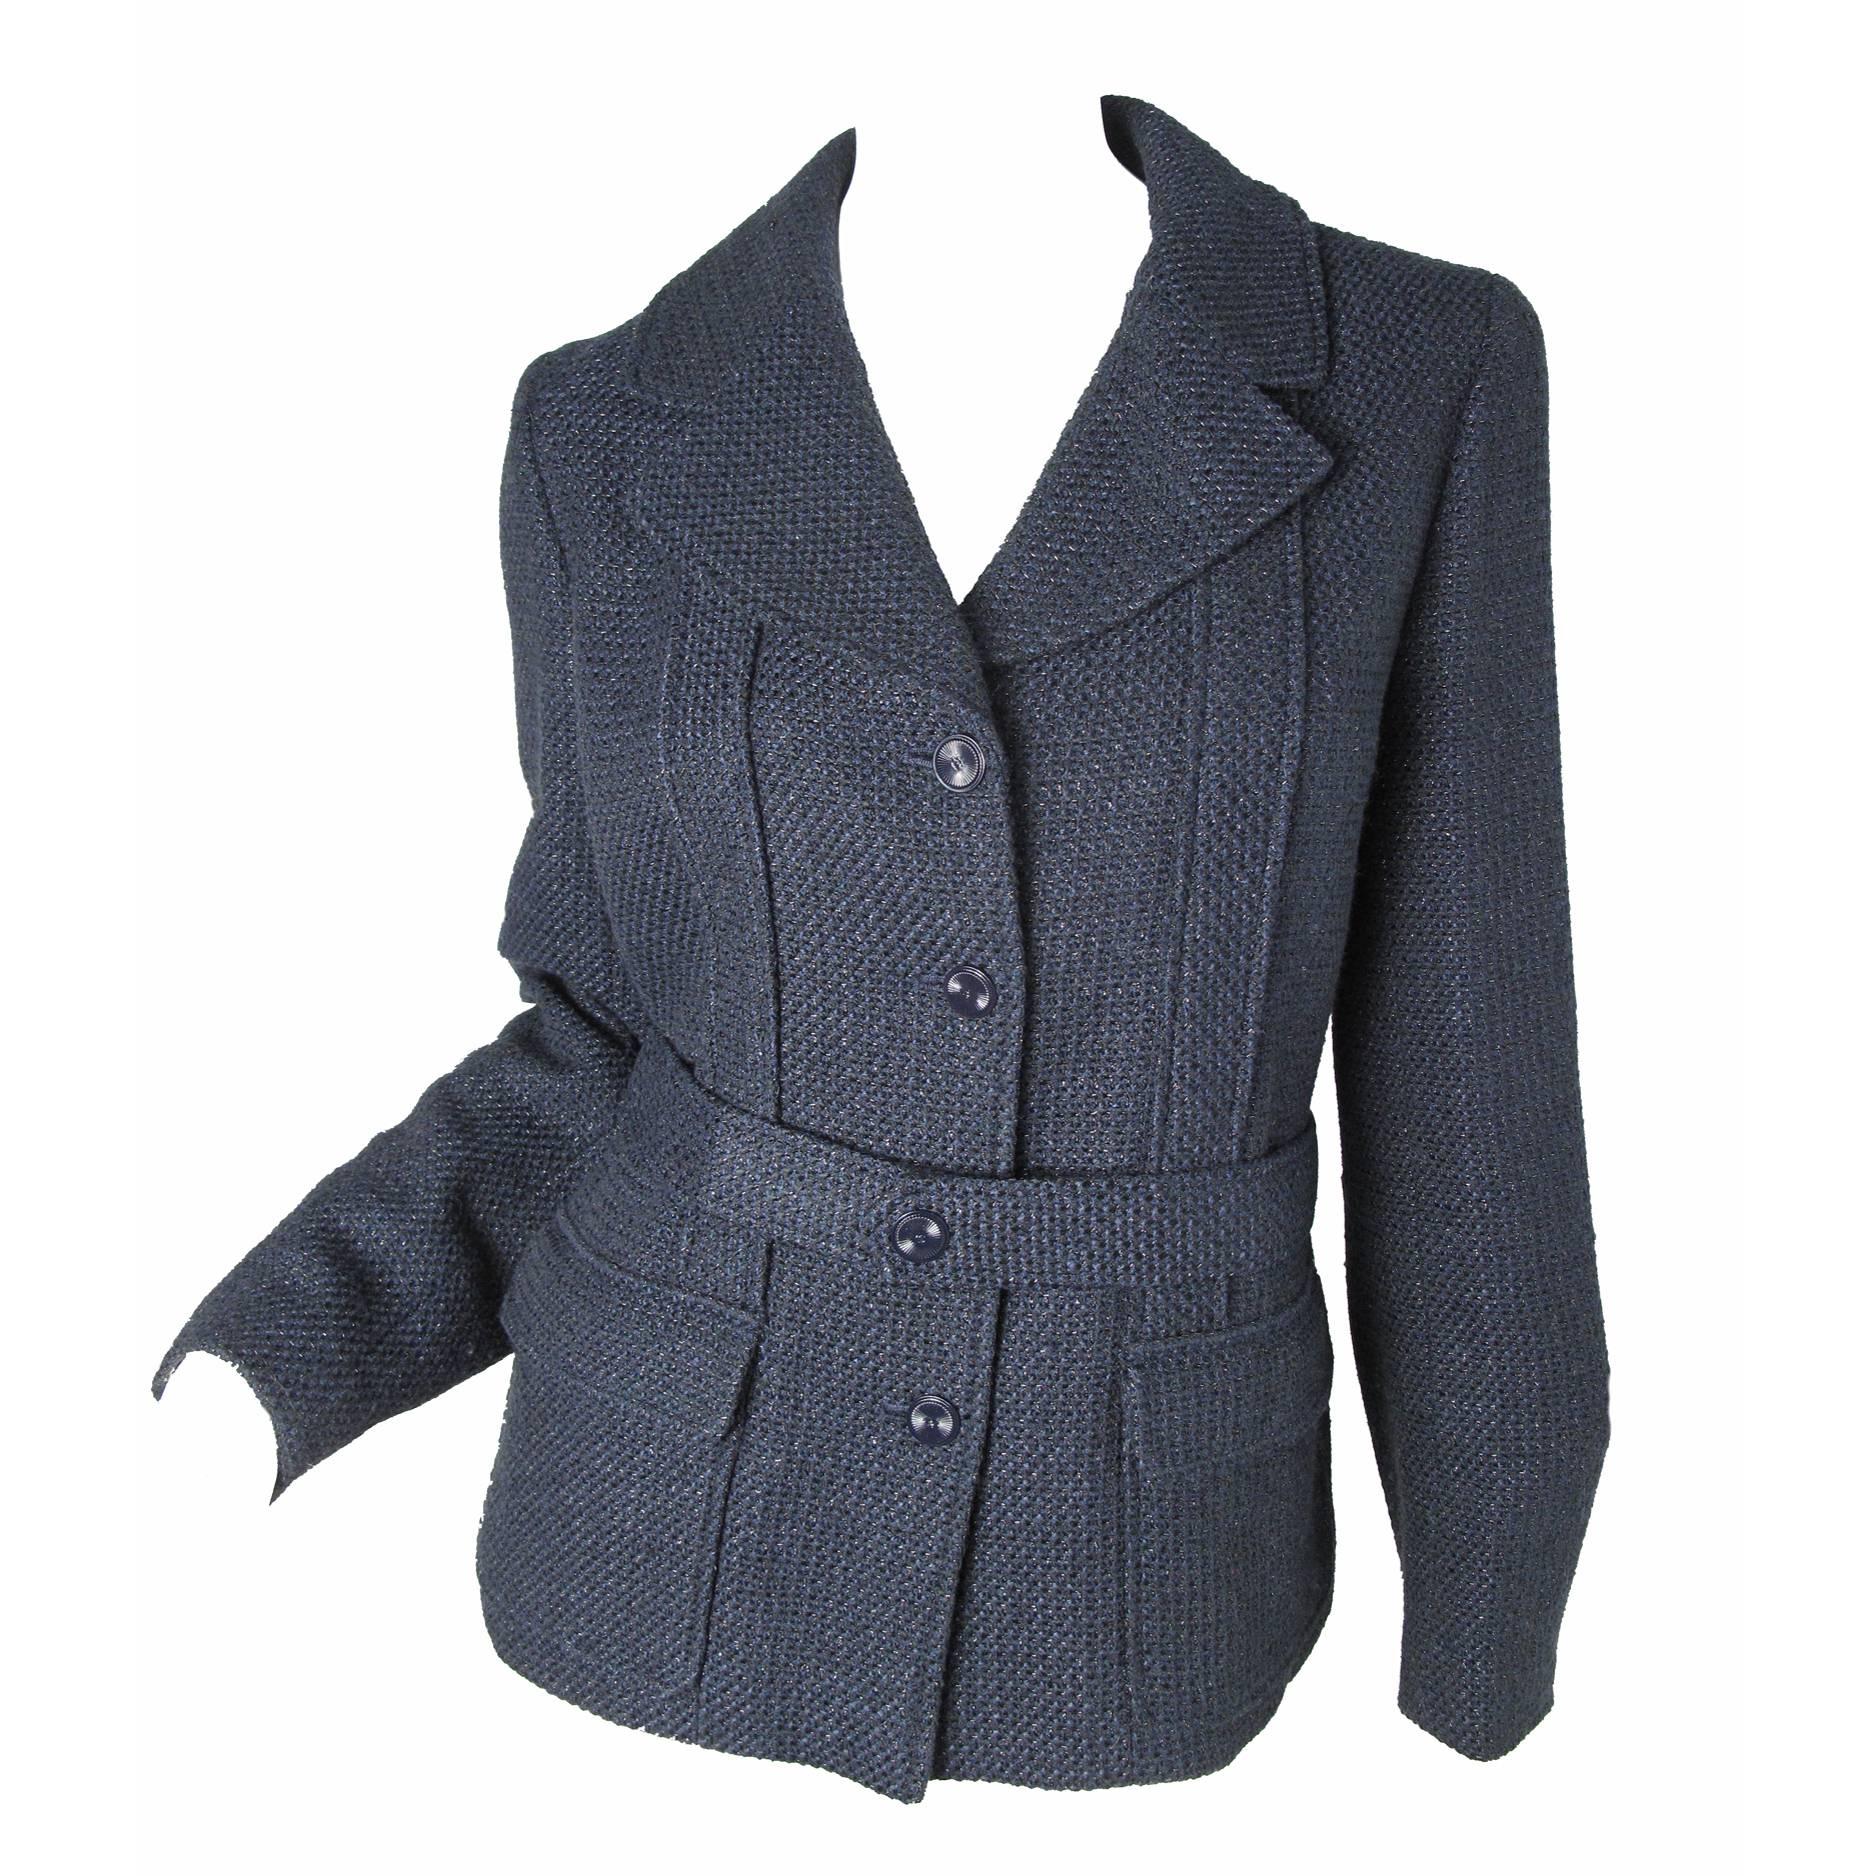 Chanel Navy Jacket with Fabric Woven to Sparkle